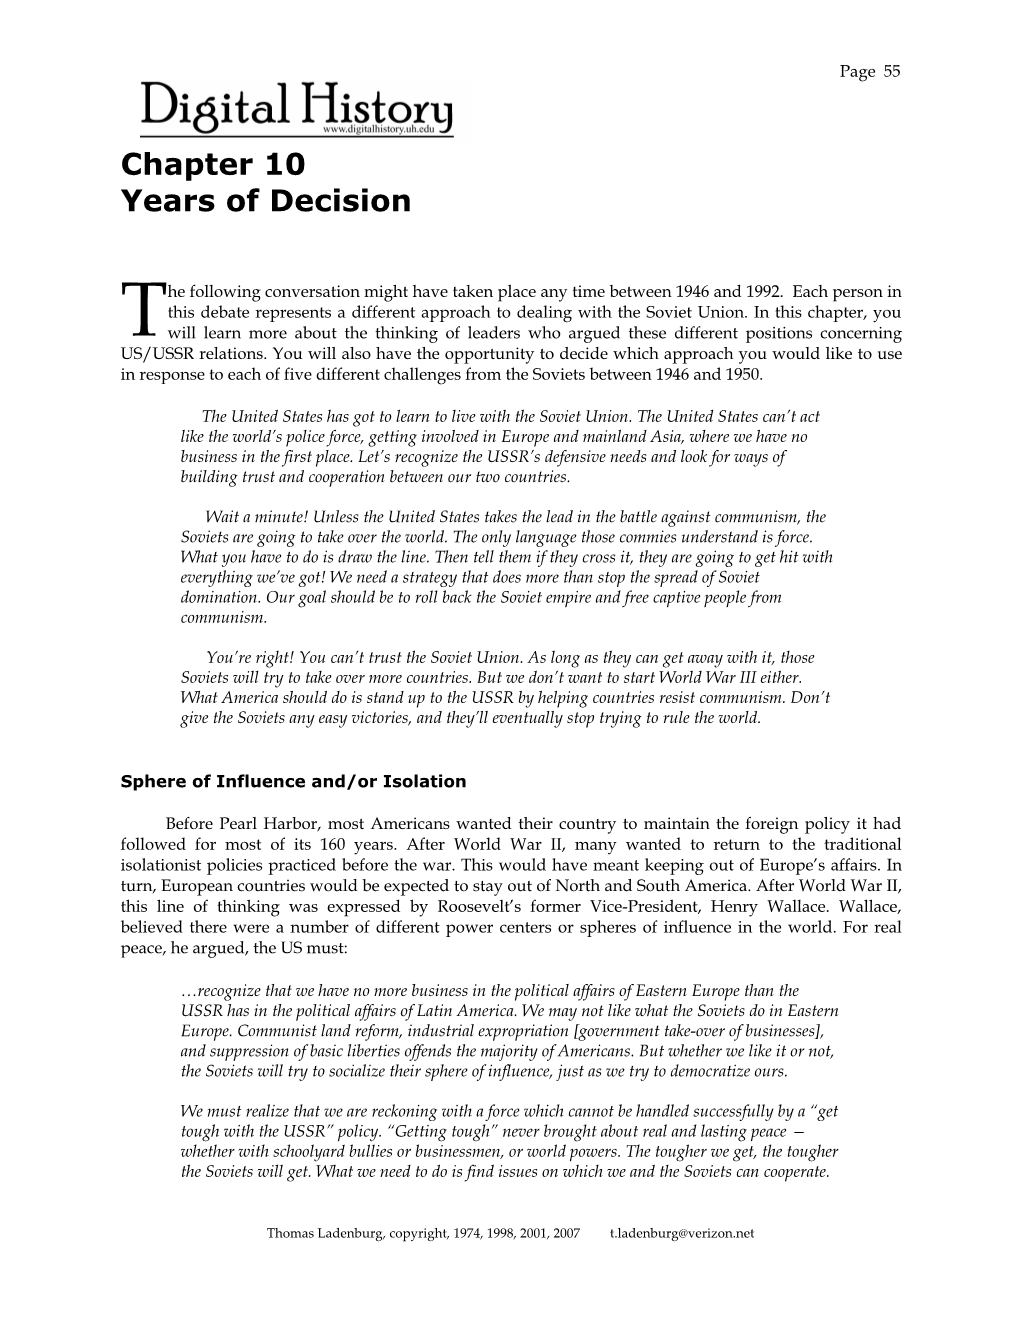 Chapter 10 Years of Decision